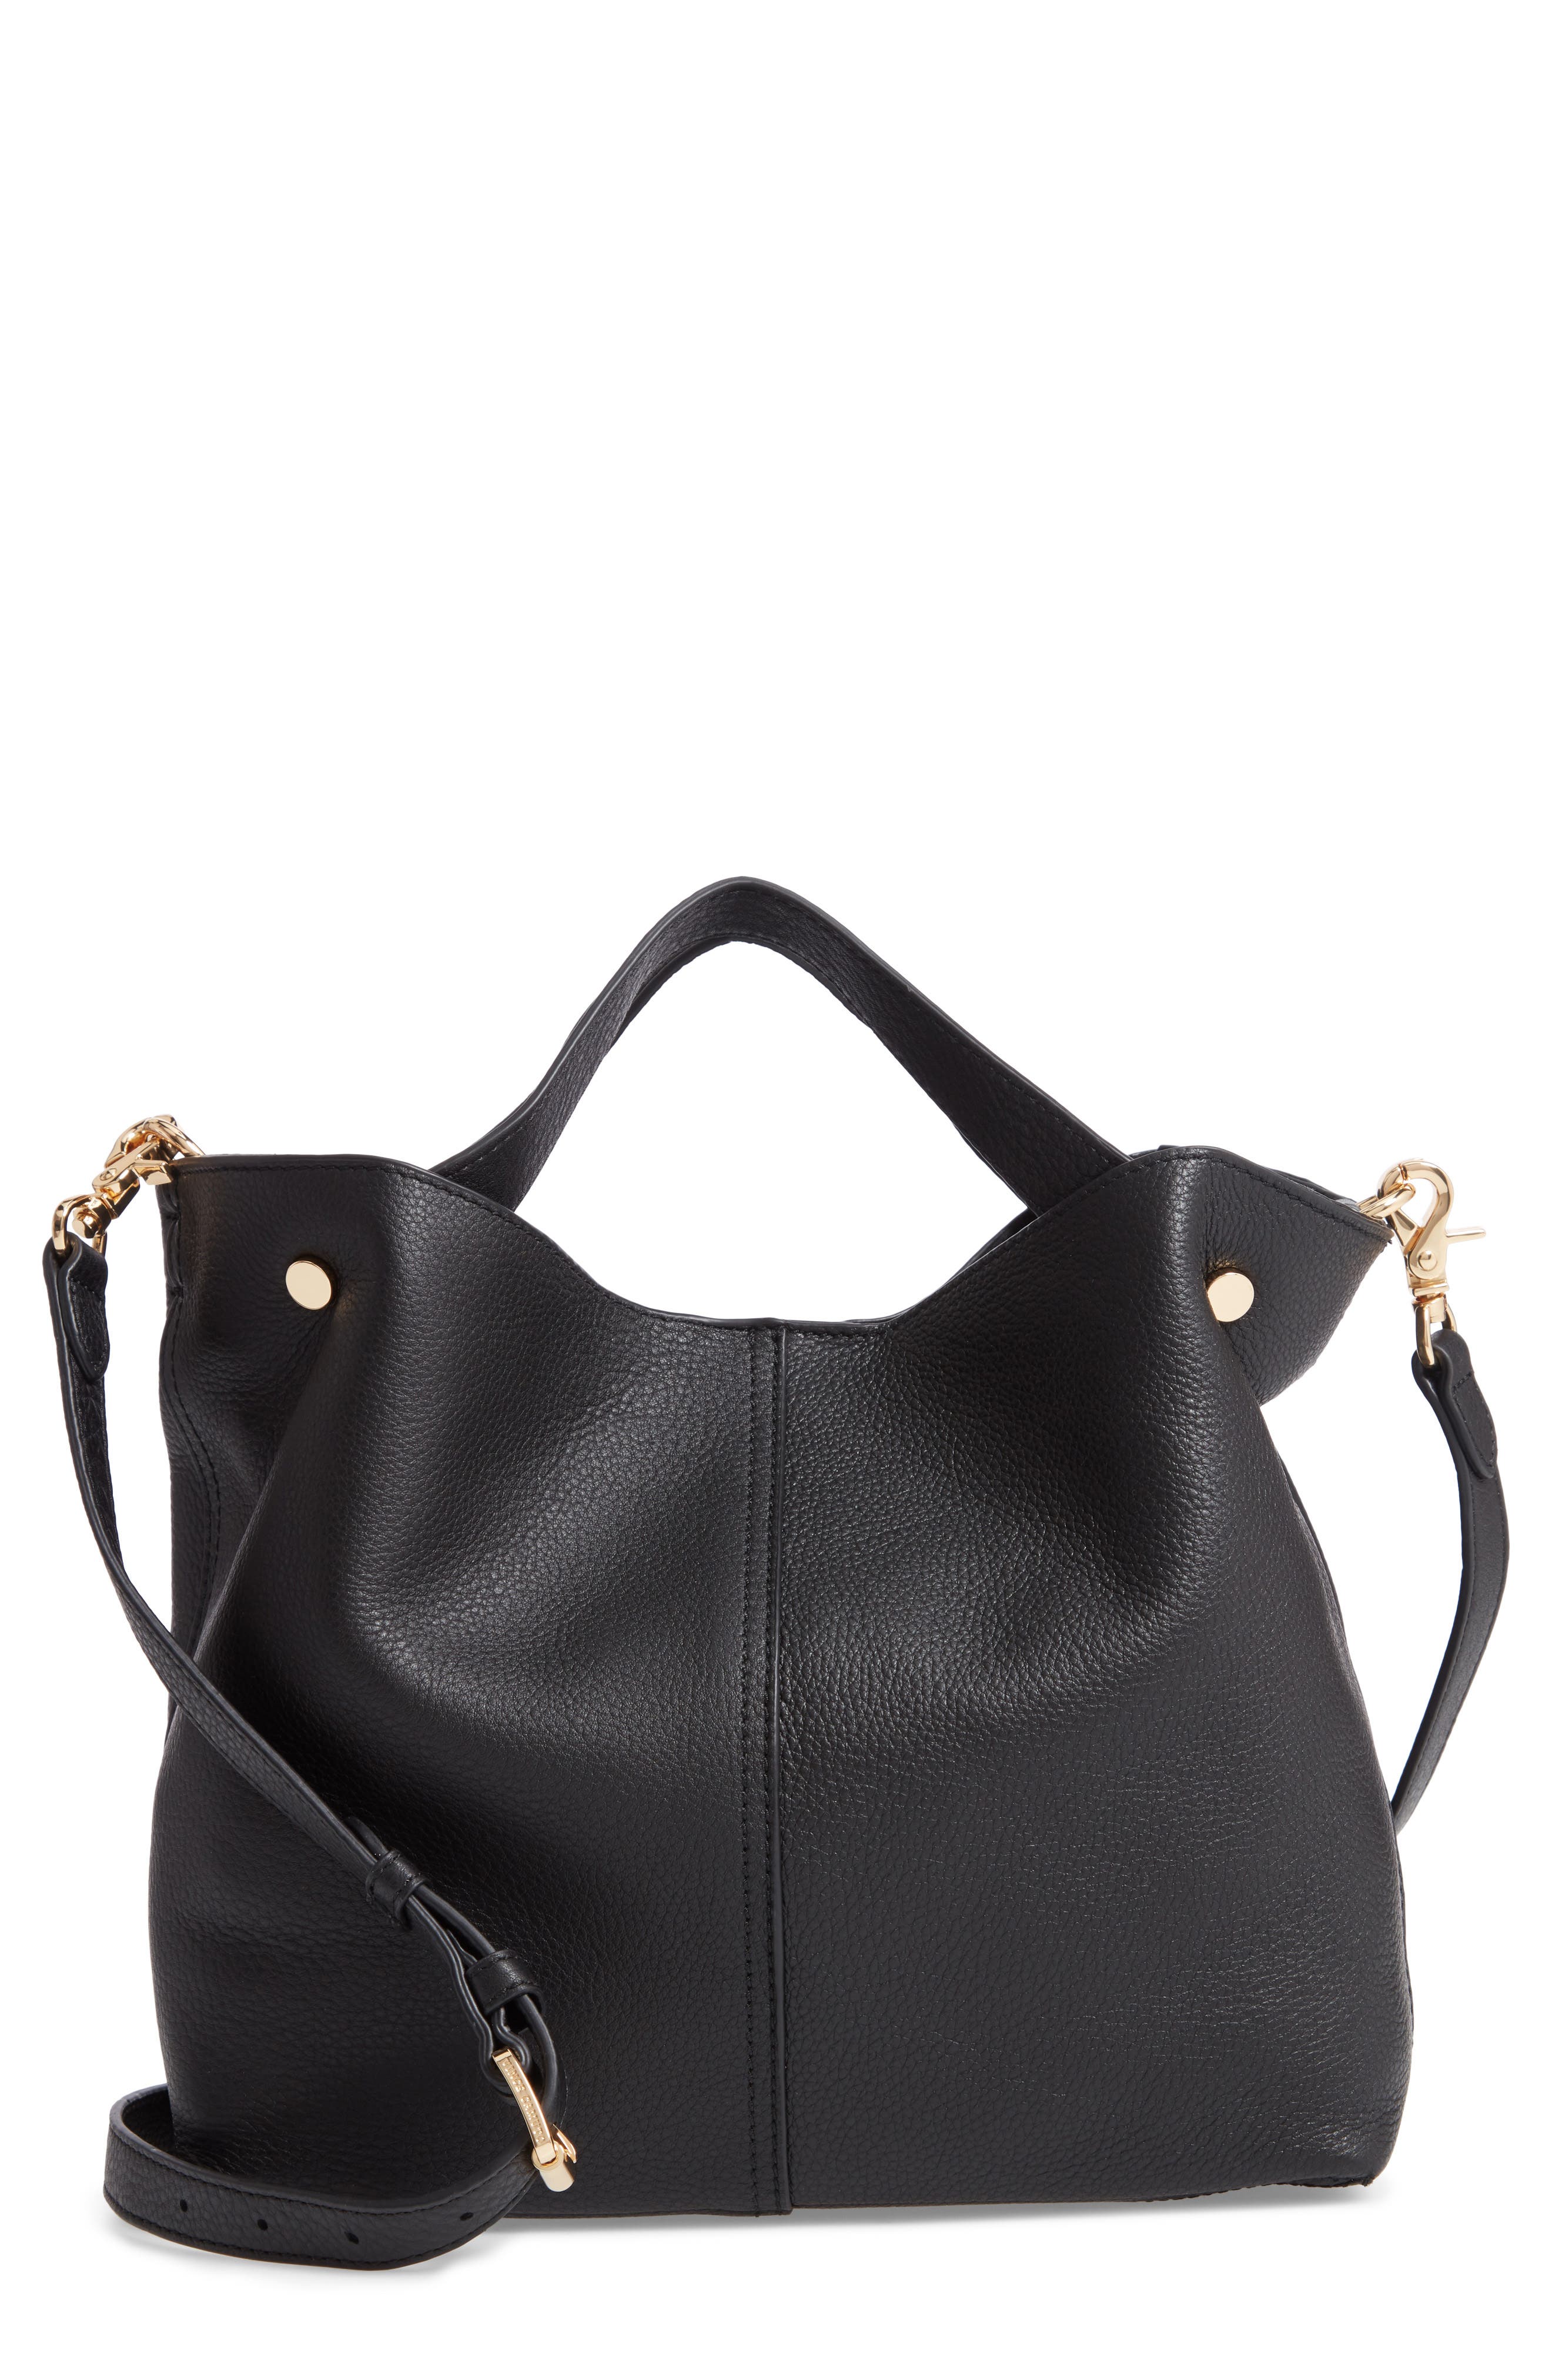 niki leather tote vince camuto